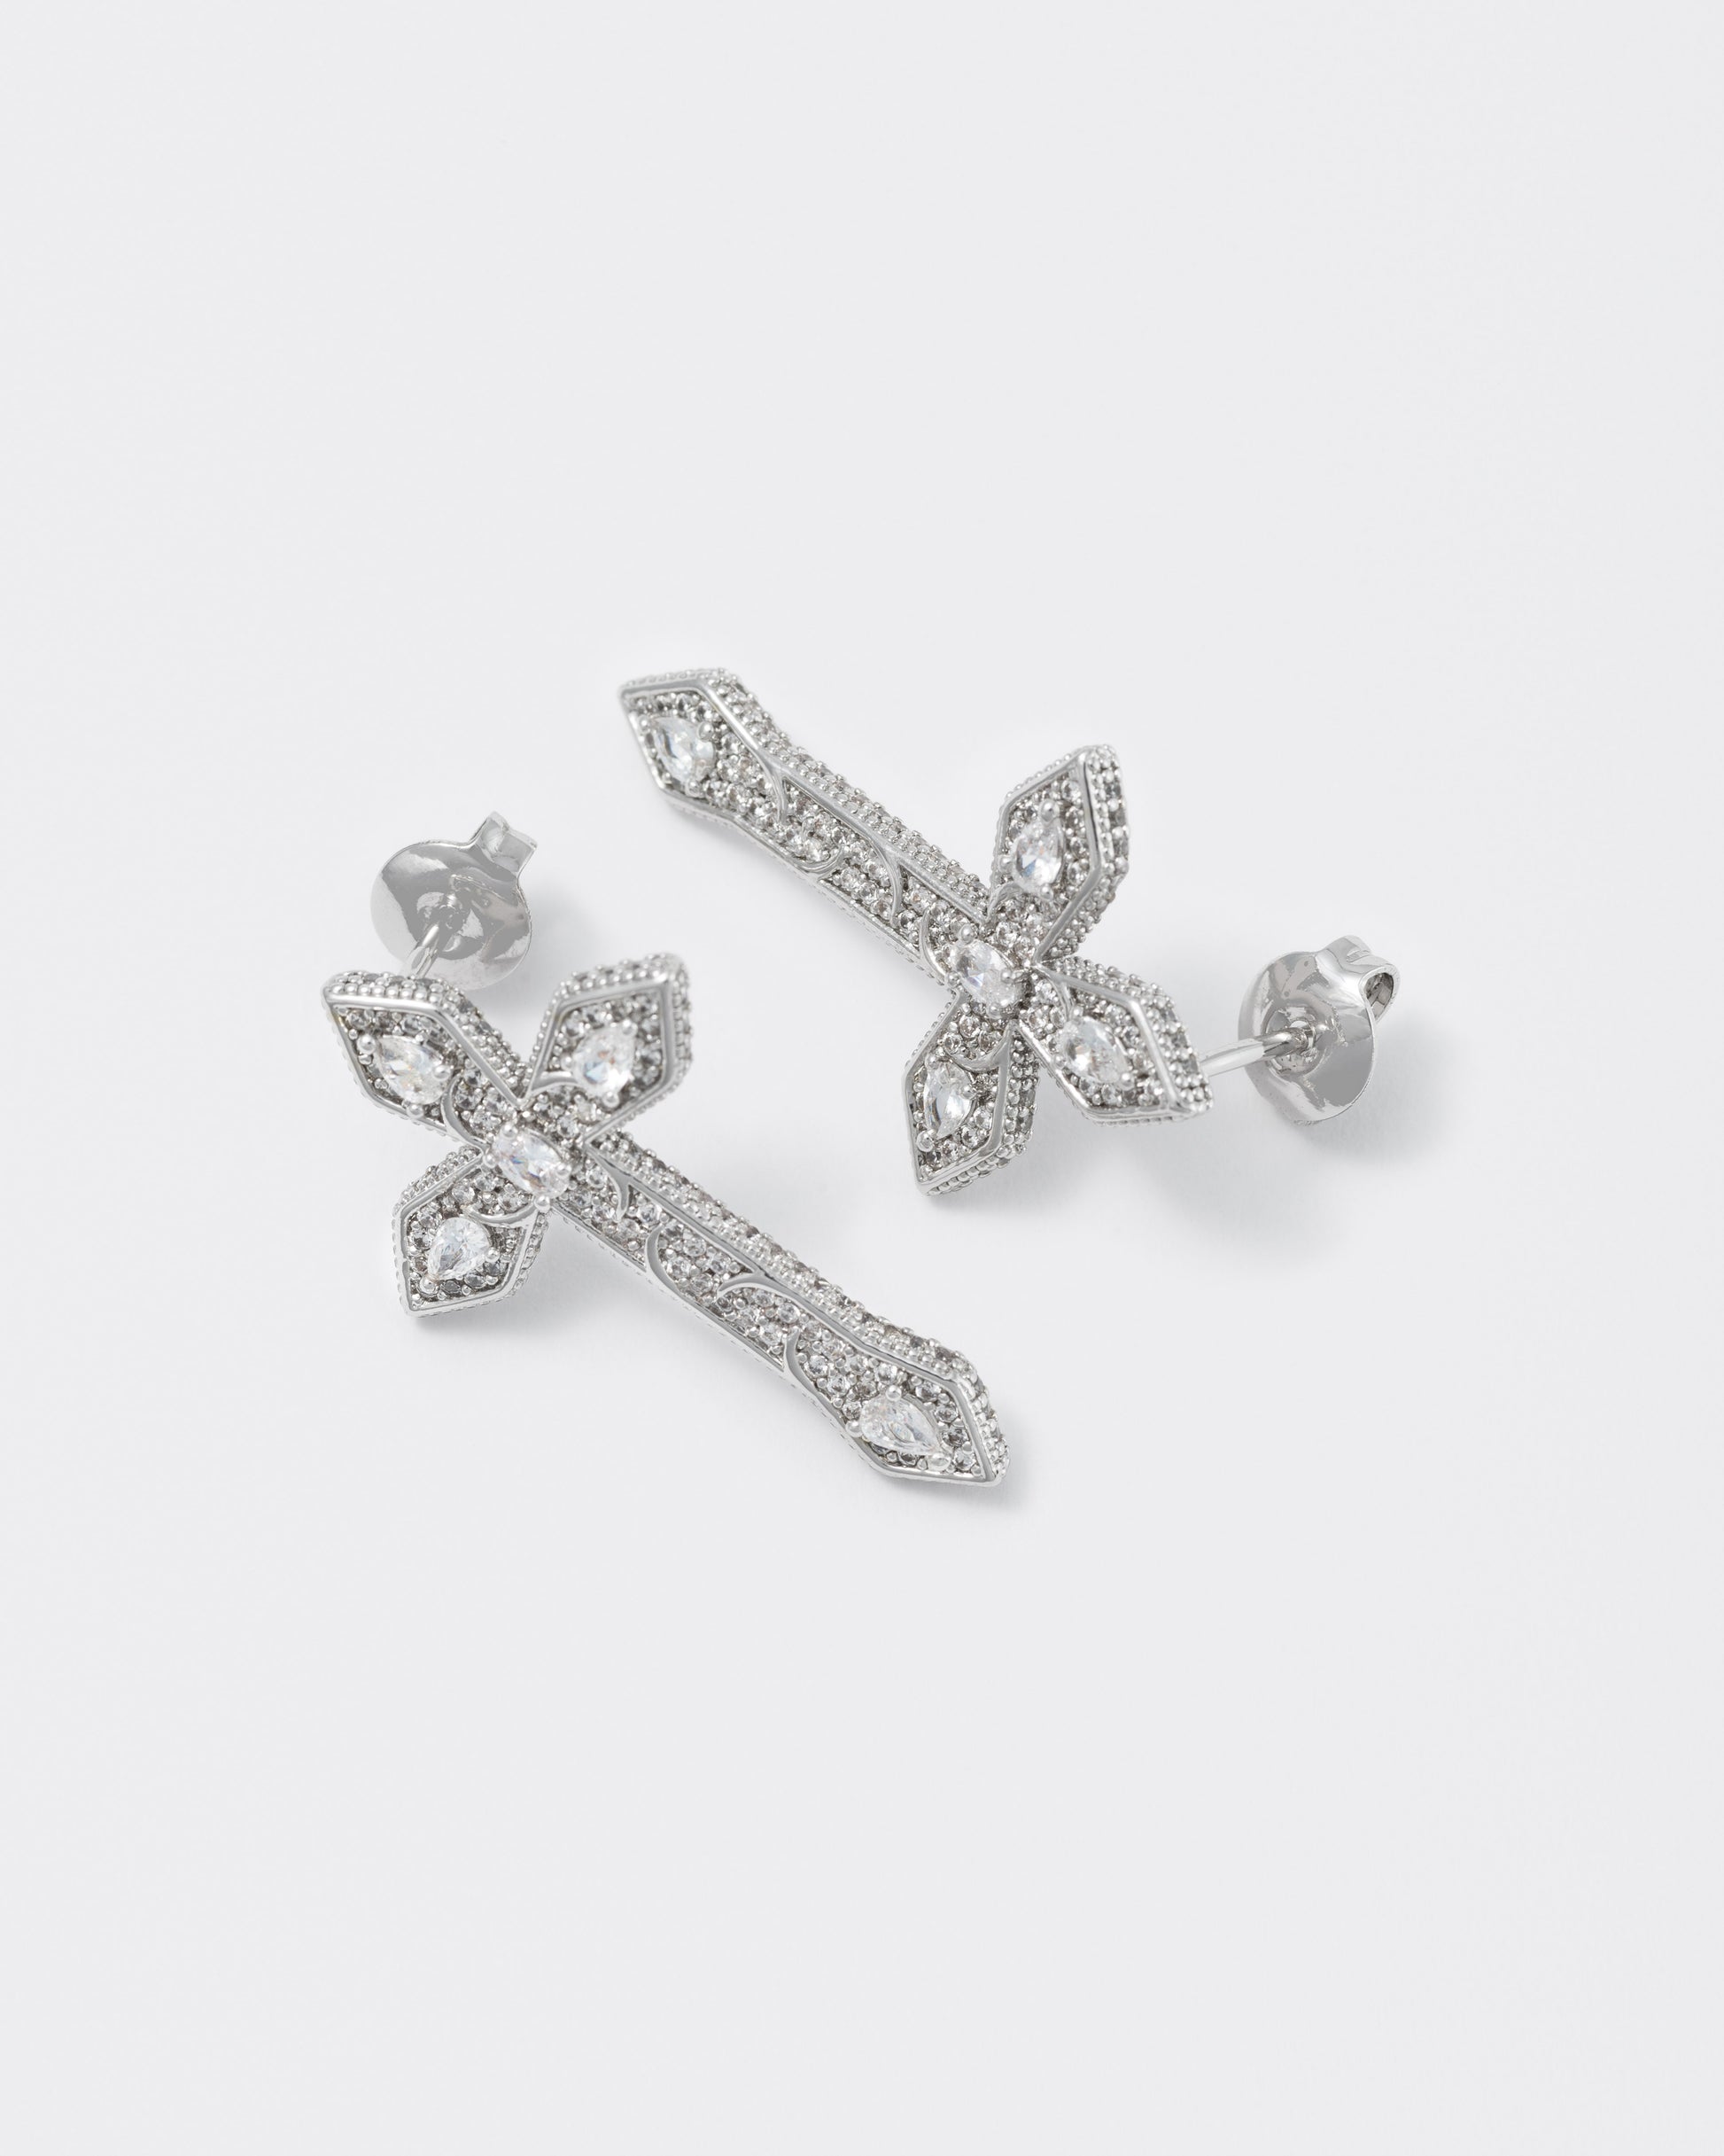 detail of gothic cross earrings with 18kt white gold coating, drop and oval shaped diamond white stones with metal gothic detailing. Hand-set micropavé on front and sides. Silver 925 pin and butterly closure with logo.